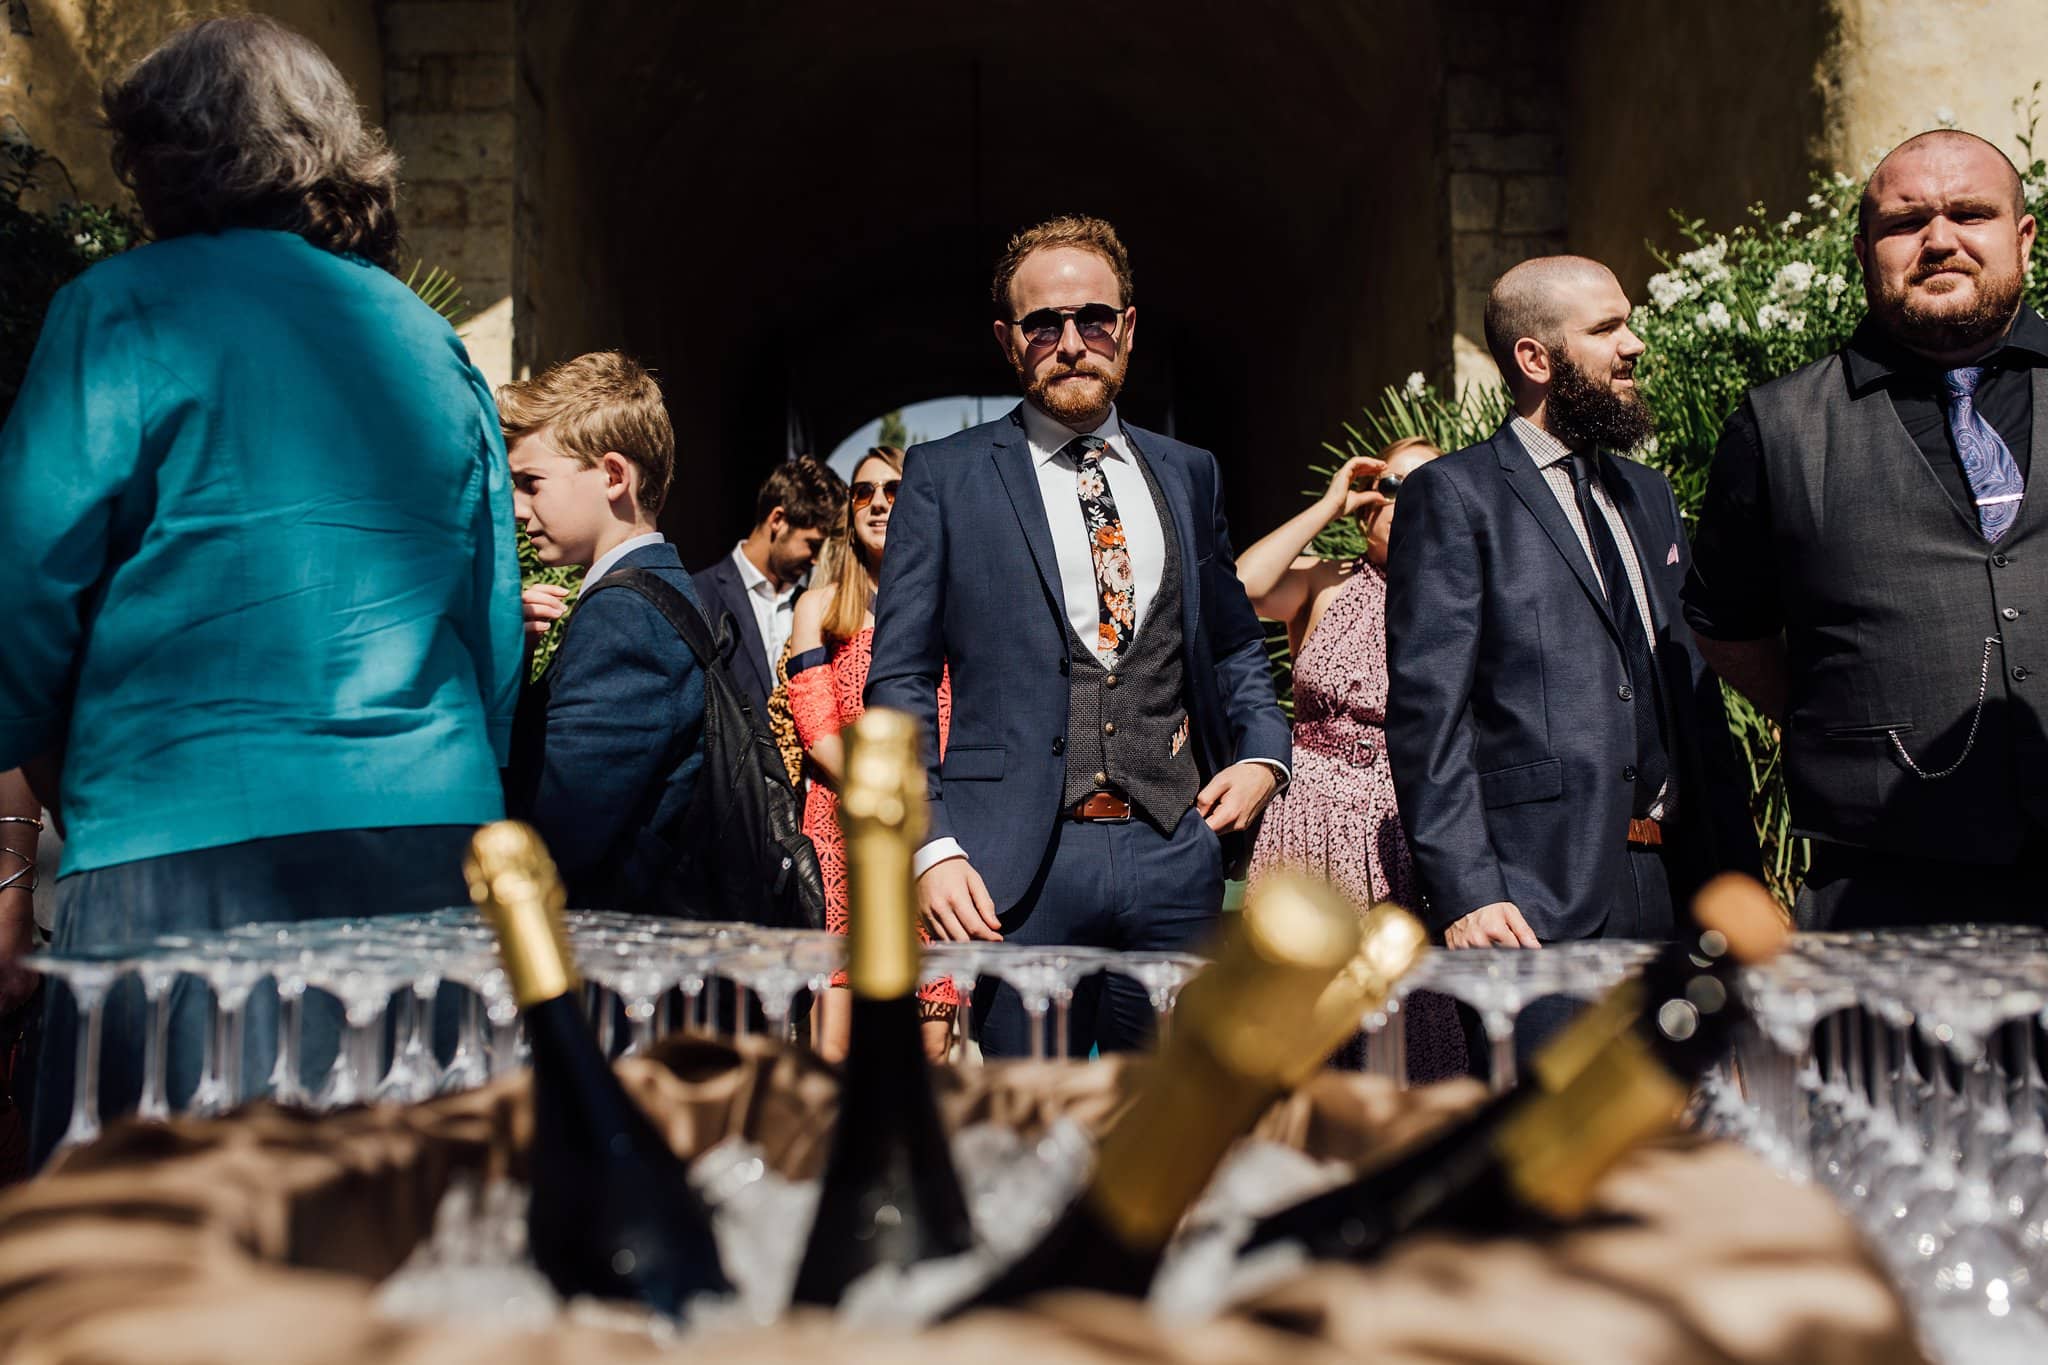 champagne wedding reception at vineyard in Italy